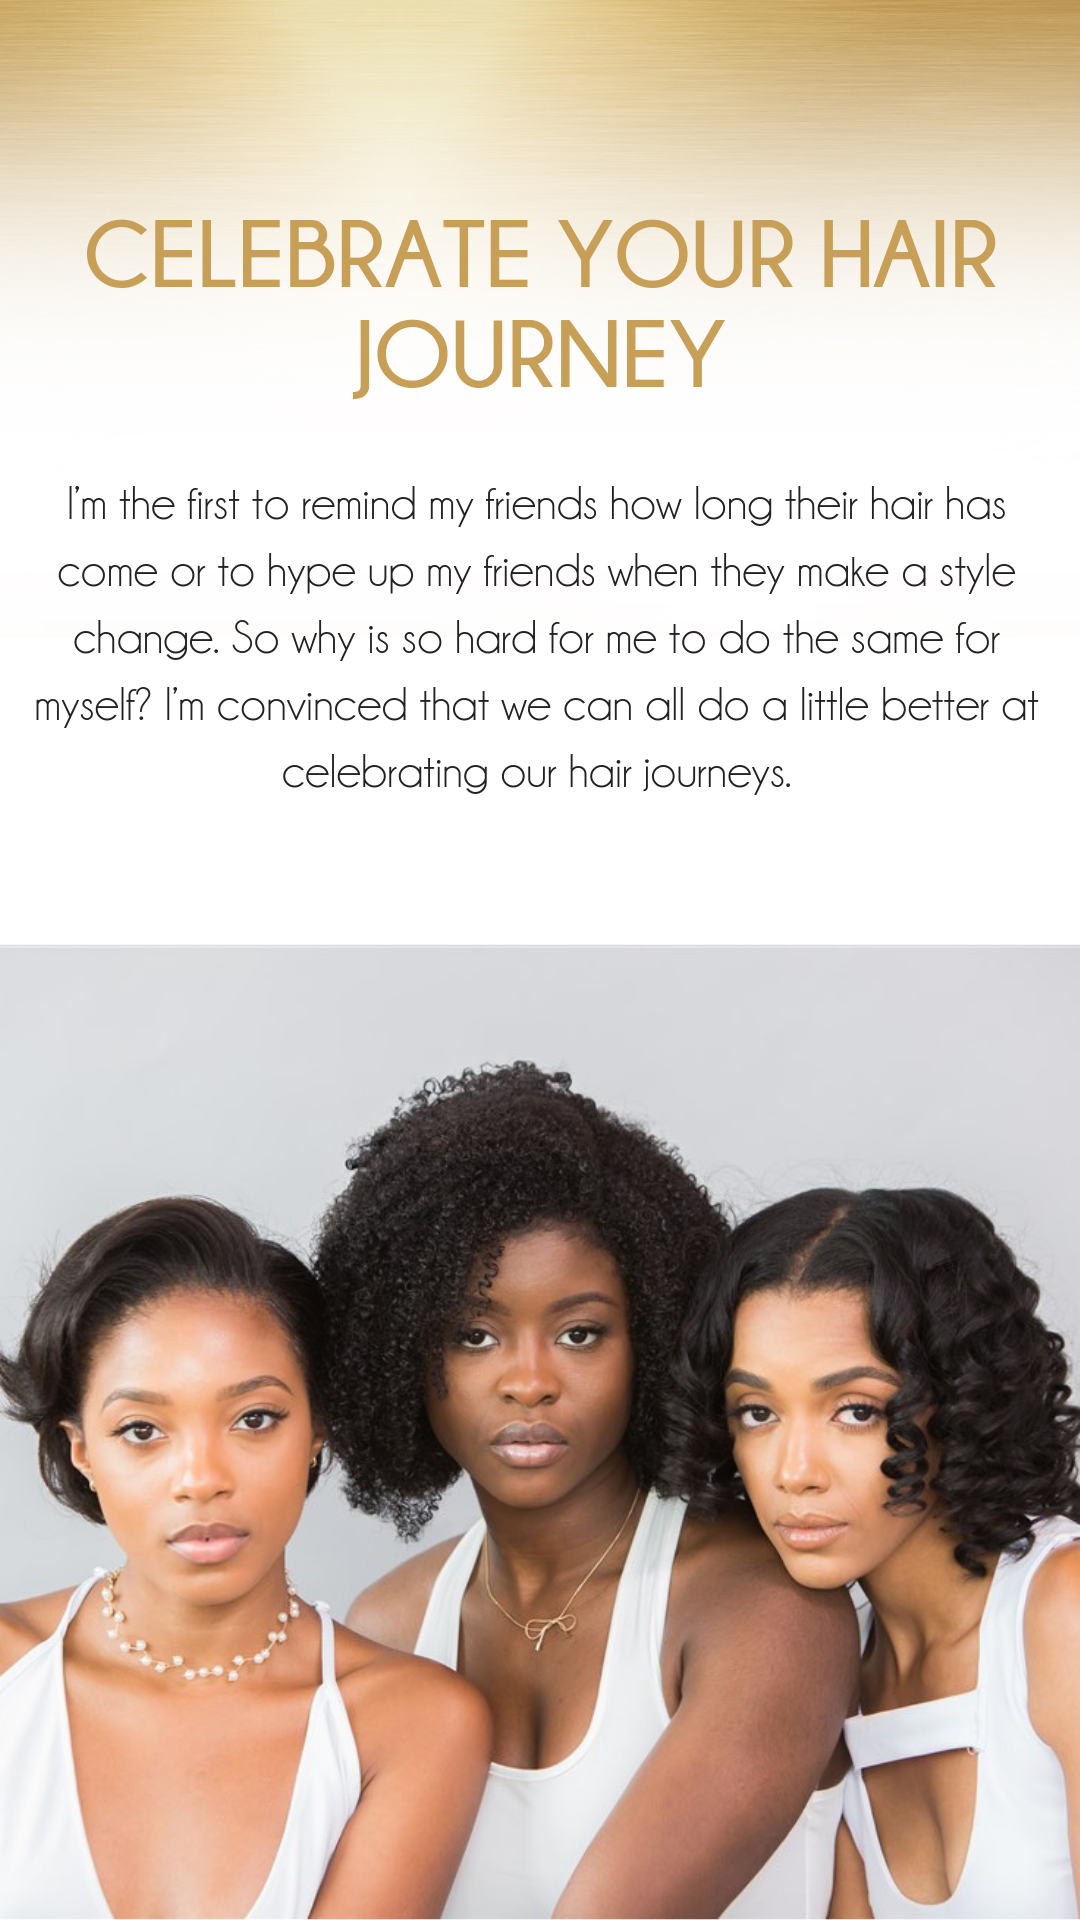 Celebrate Your Hair Journey